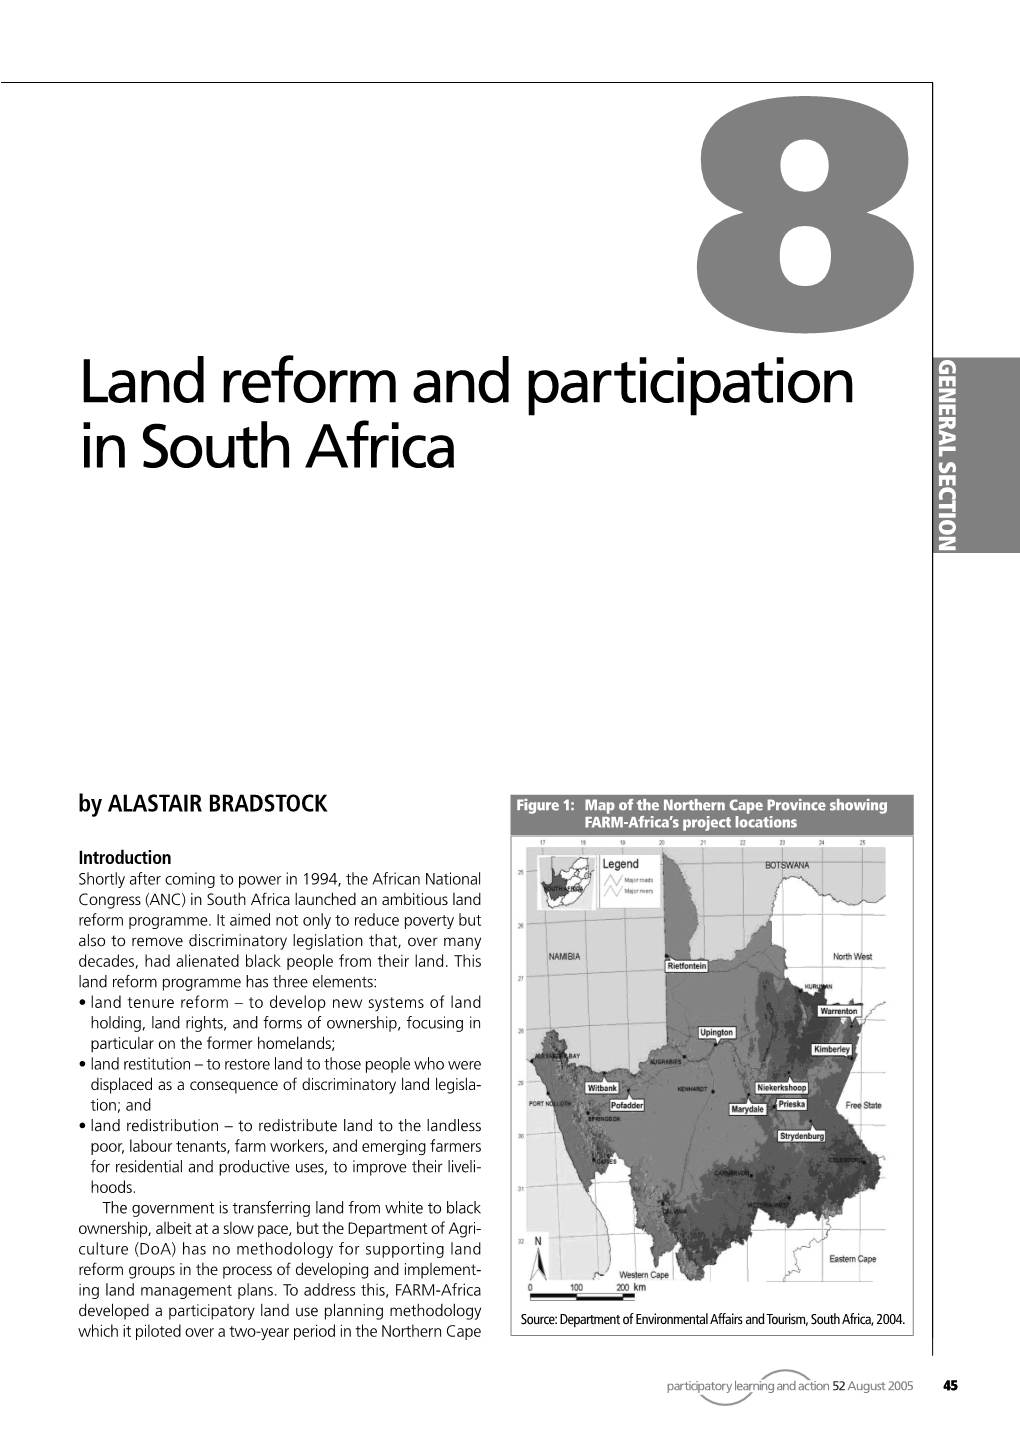 Land Reform and Participation in South Africa